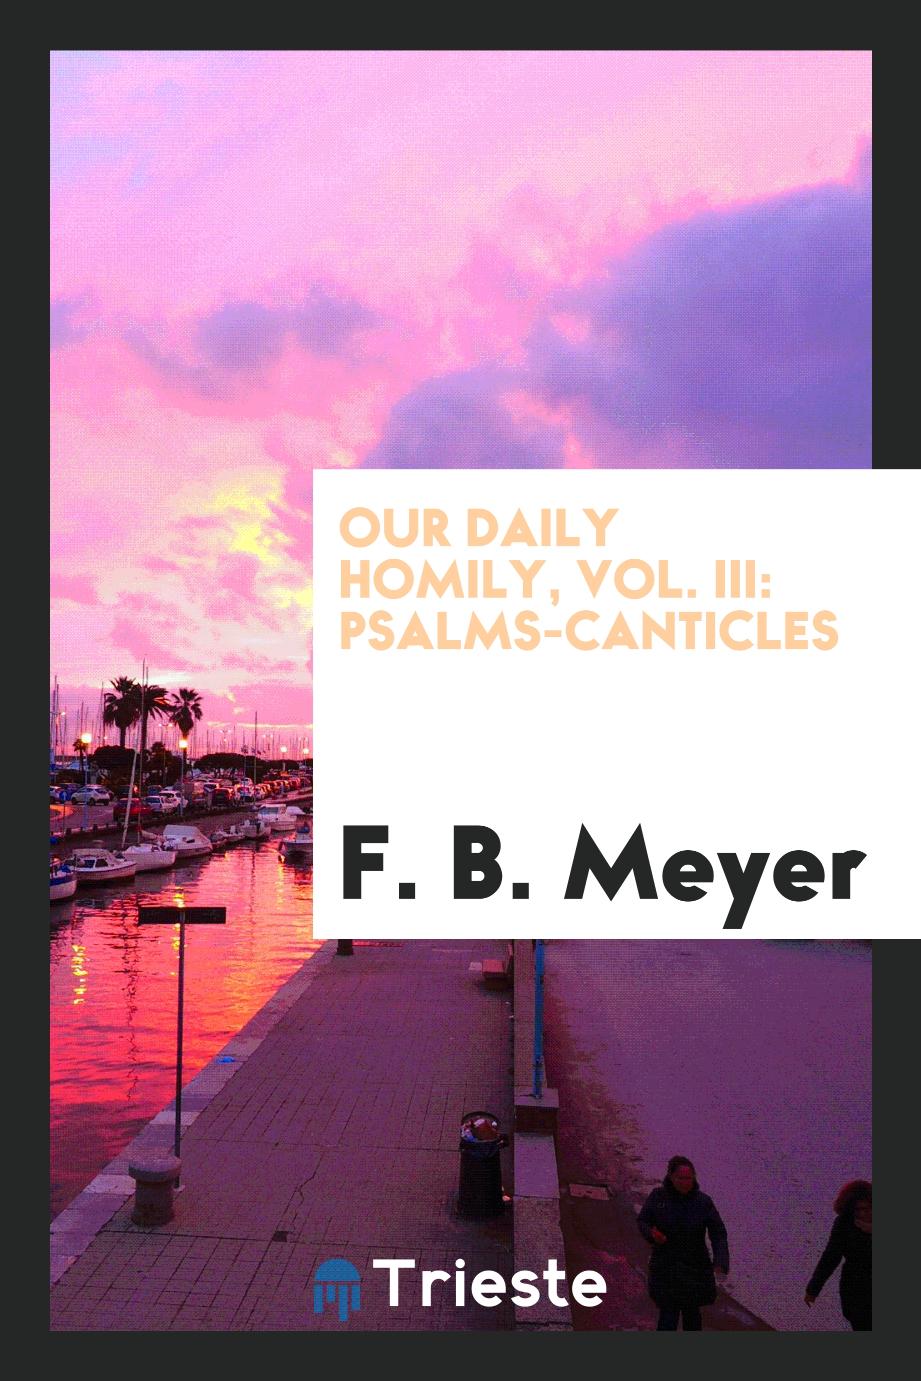 Our daily homily, Vol. III: Psalms-Canticles